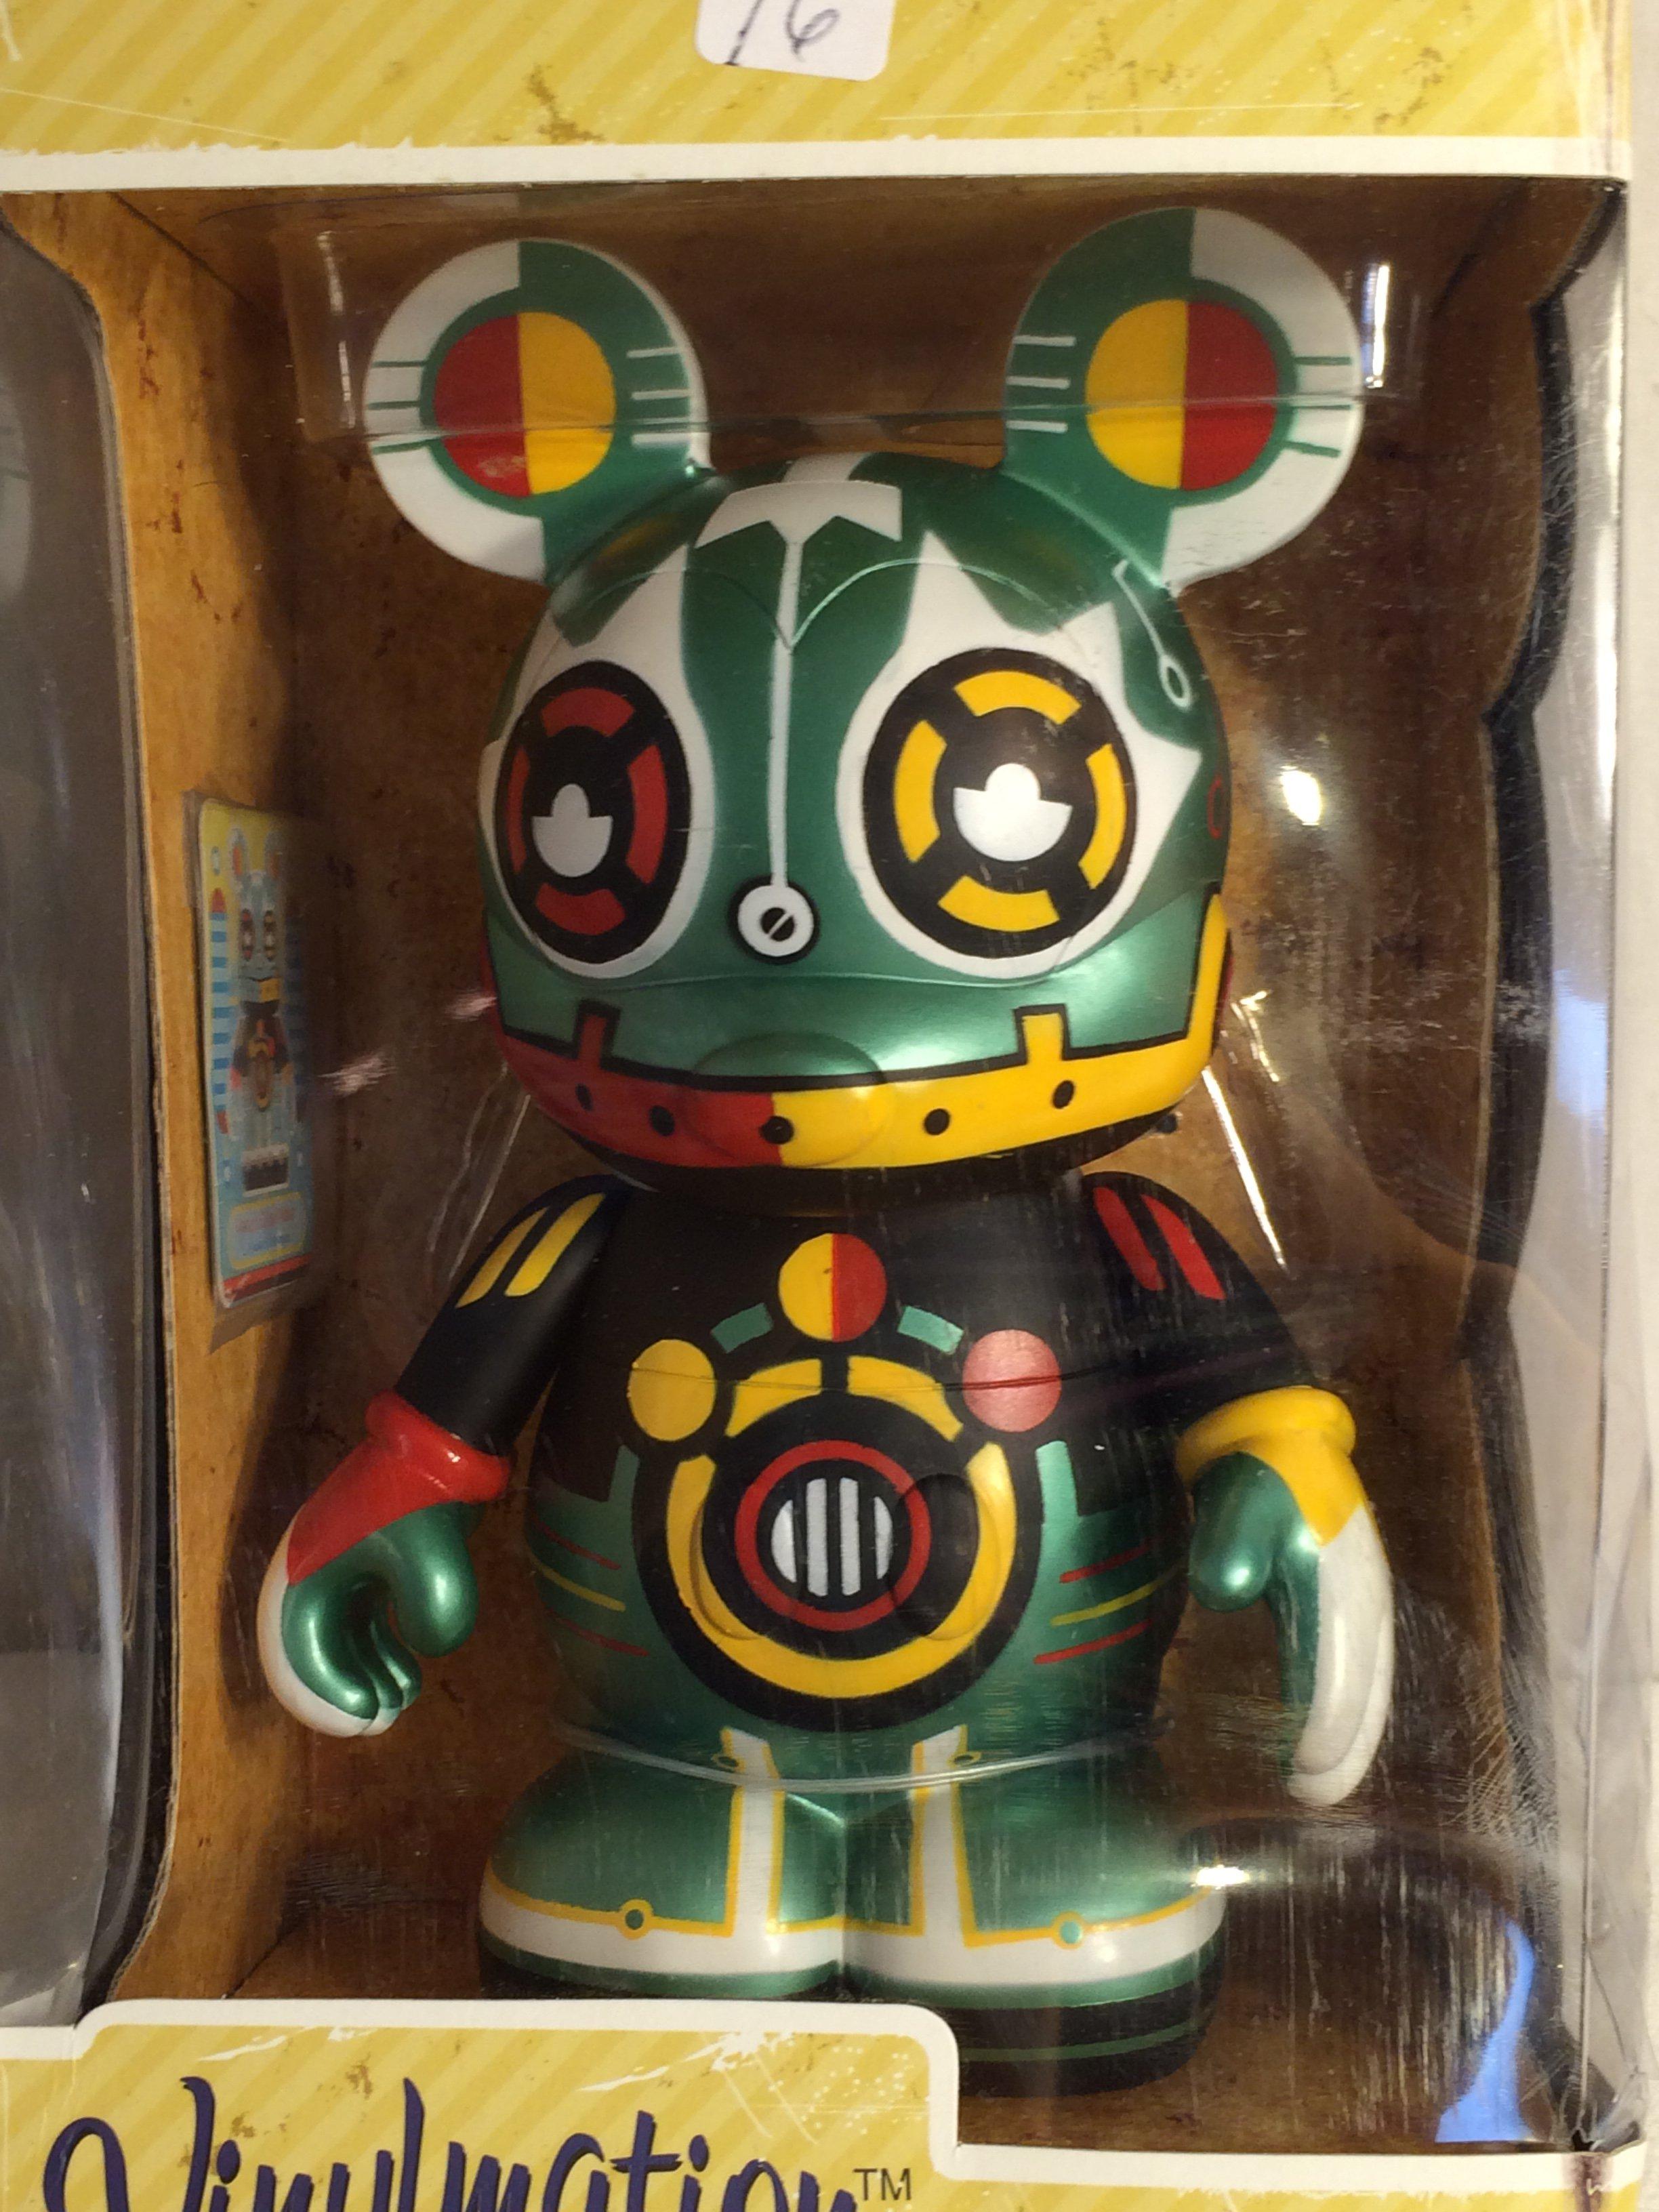 Collector Disney Vinylmation Robots Limited Edition Of 600 Green Reflector 6.5w by 11.5" t Box Sz